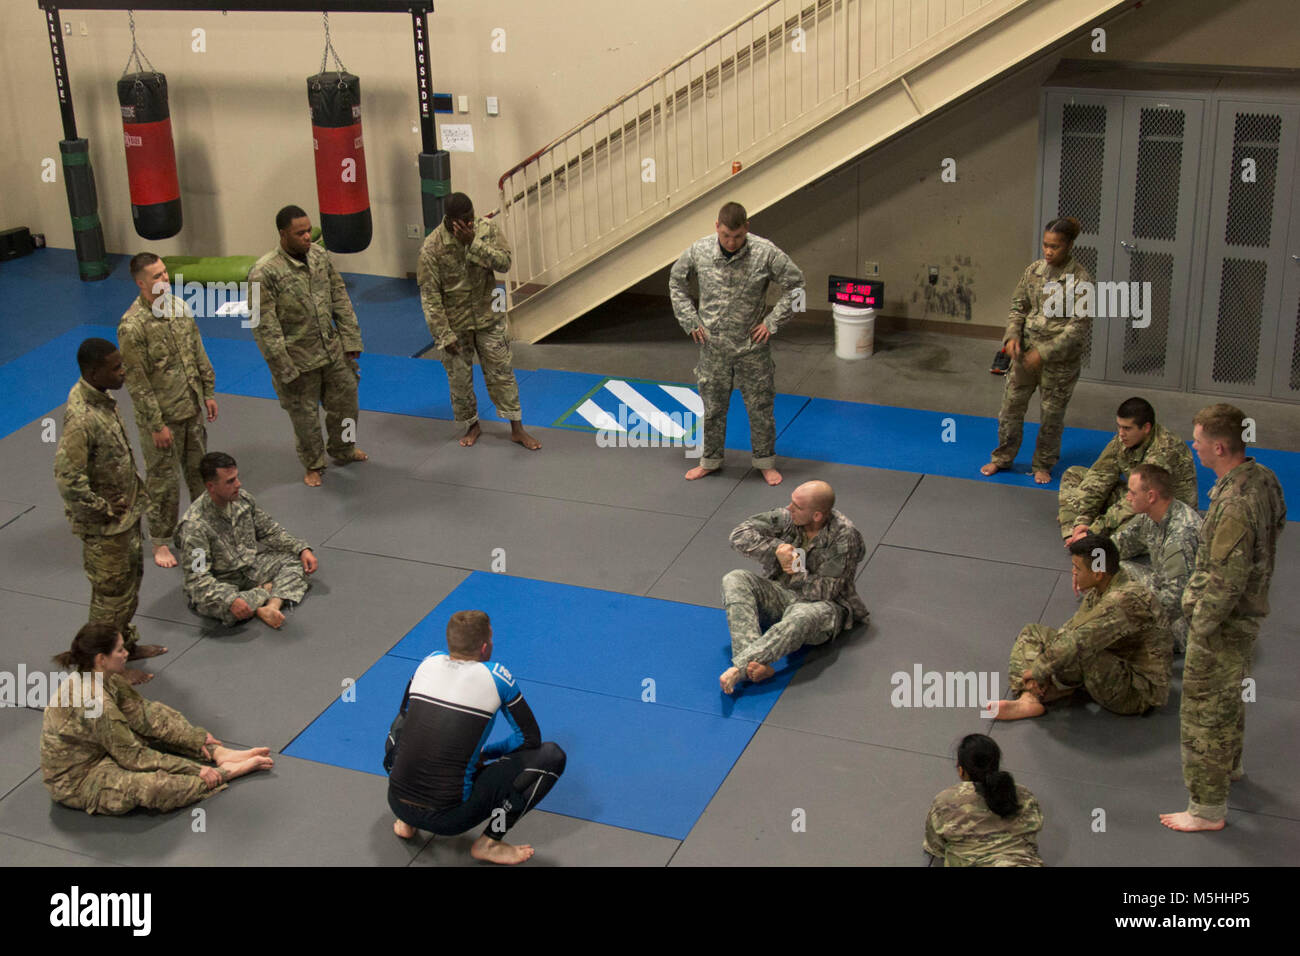 Soldiers assigned to 2nd Armored Brigade Combat Team receive their next grappling technique from Capt. Andrew Alterman, a chaplain assigned to 9th Engineer Battalion, 2nd Armored Brigade Combat Team, 3rd Infantry Division during a chaplain’s inspirational combatives training session, February 13, 2018, at Fort Stewart, Ga. 3ID Soldiers training in close quarters combatives level I as well as the Fort Stewart combatives team were tasked with executing a series of instructed grappling techniques paired alongside inspirational guidance from the chaplain. (U.S. Army Stock Photo